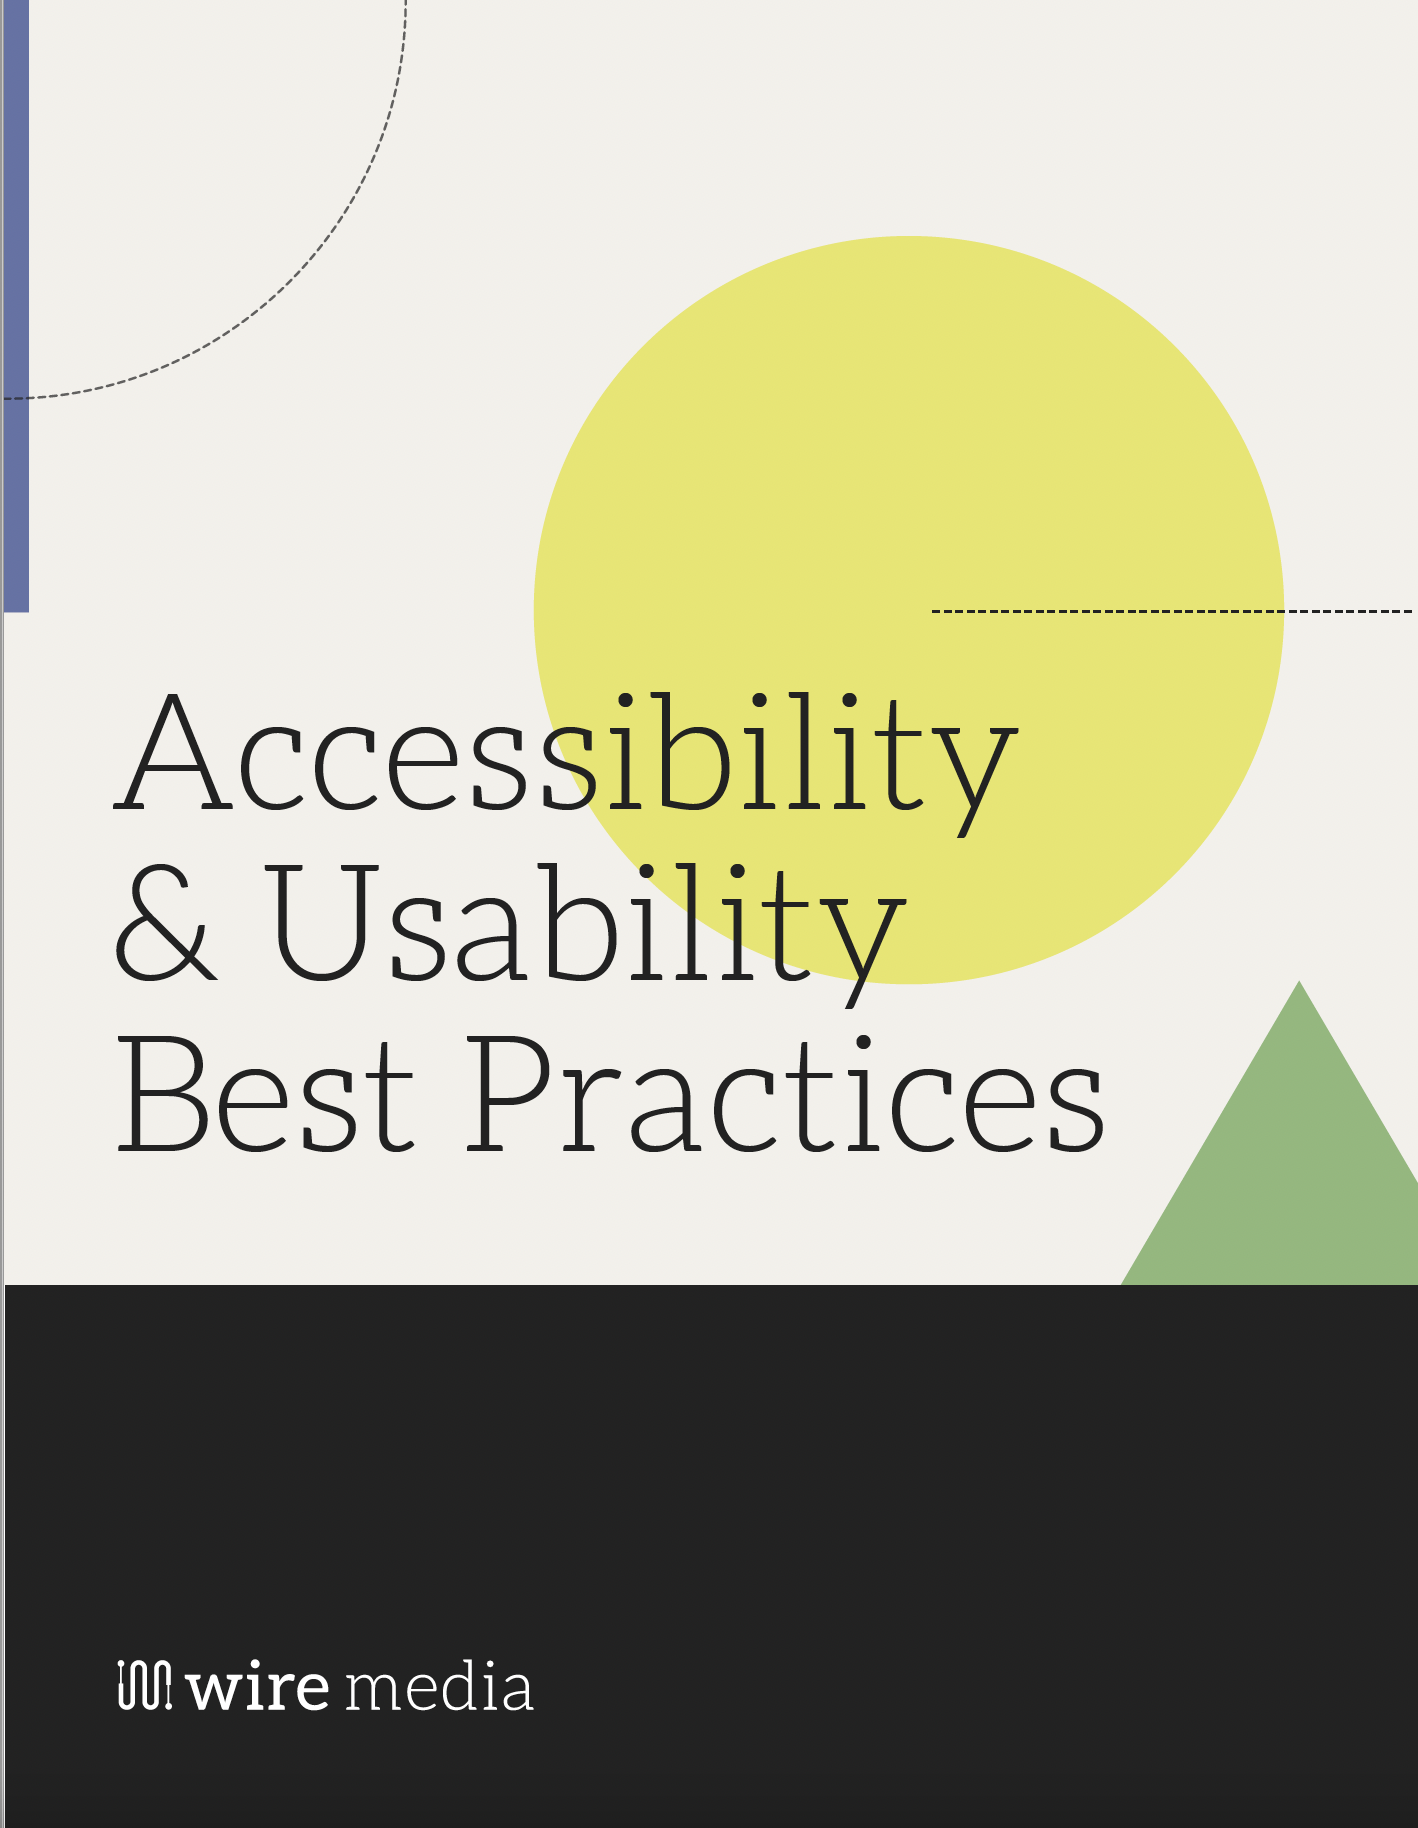 Accessibility & Usability Best Practices